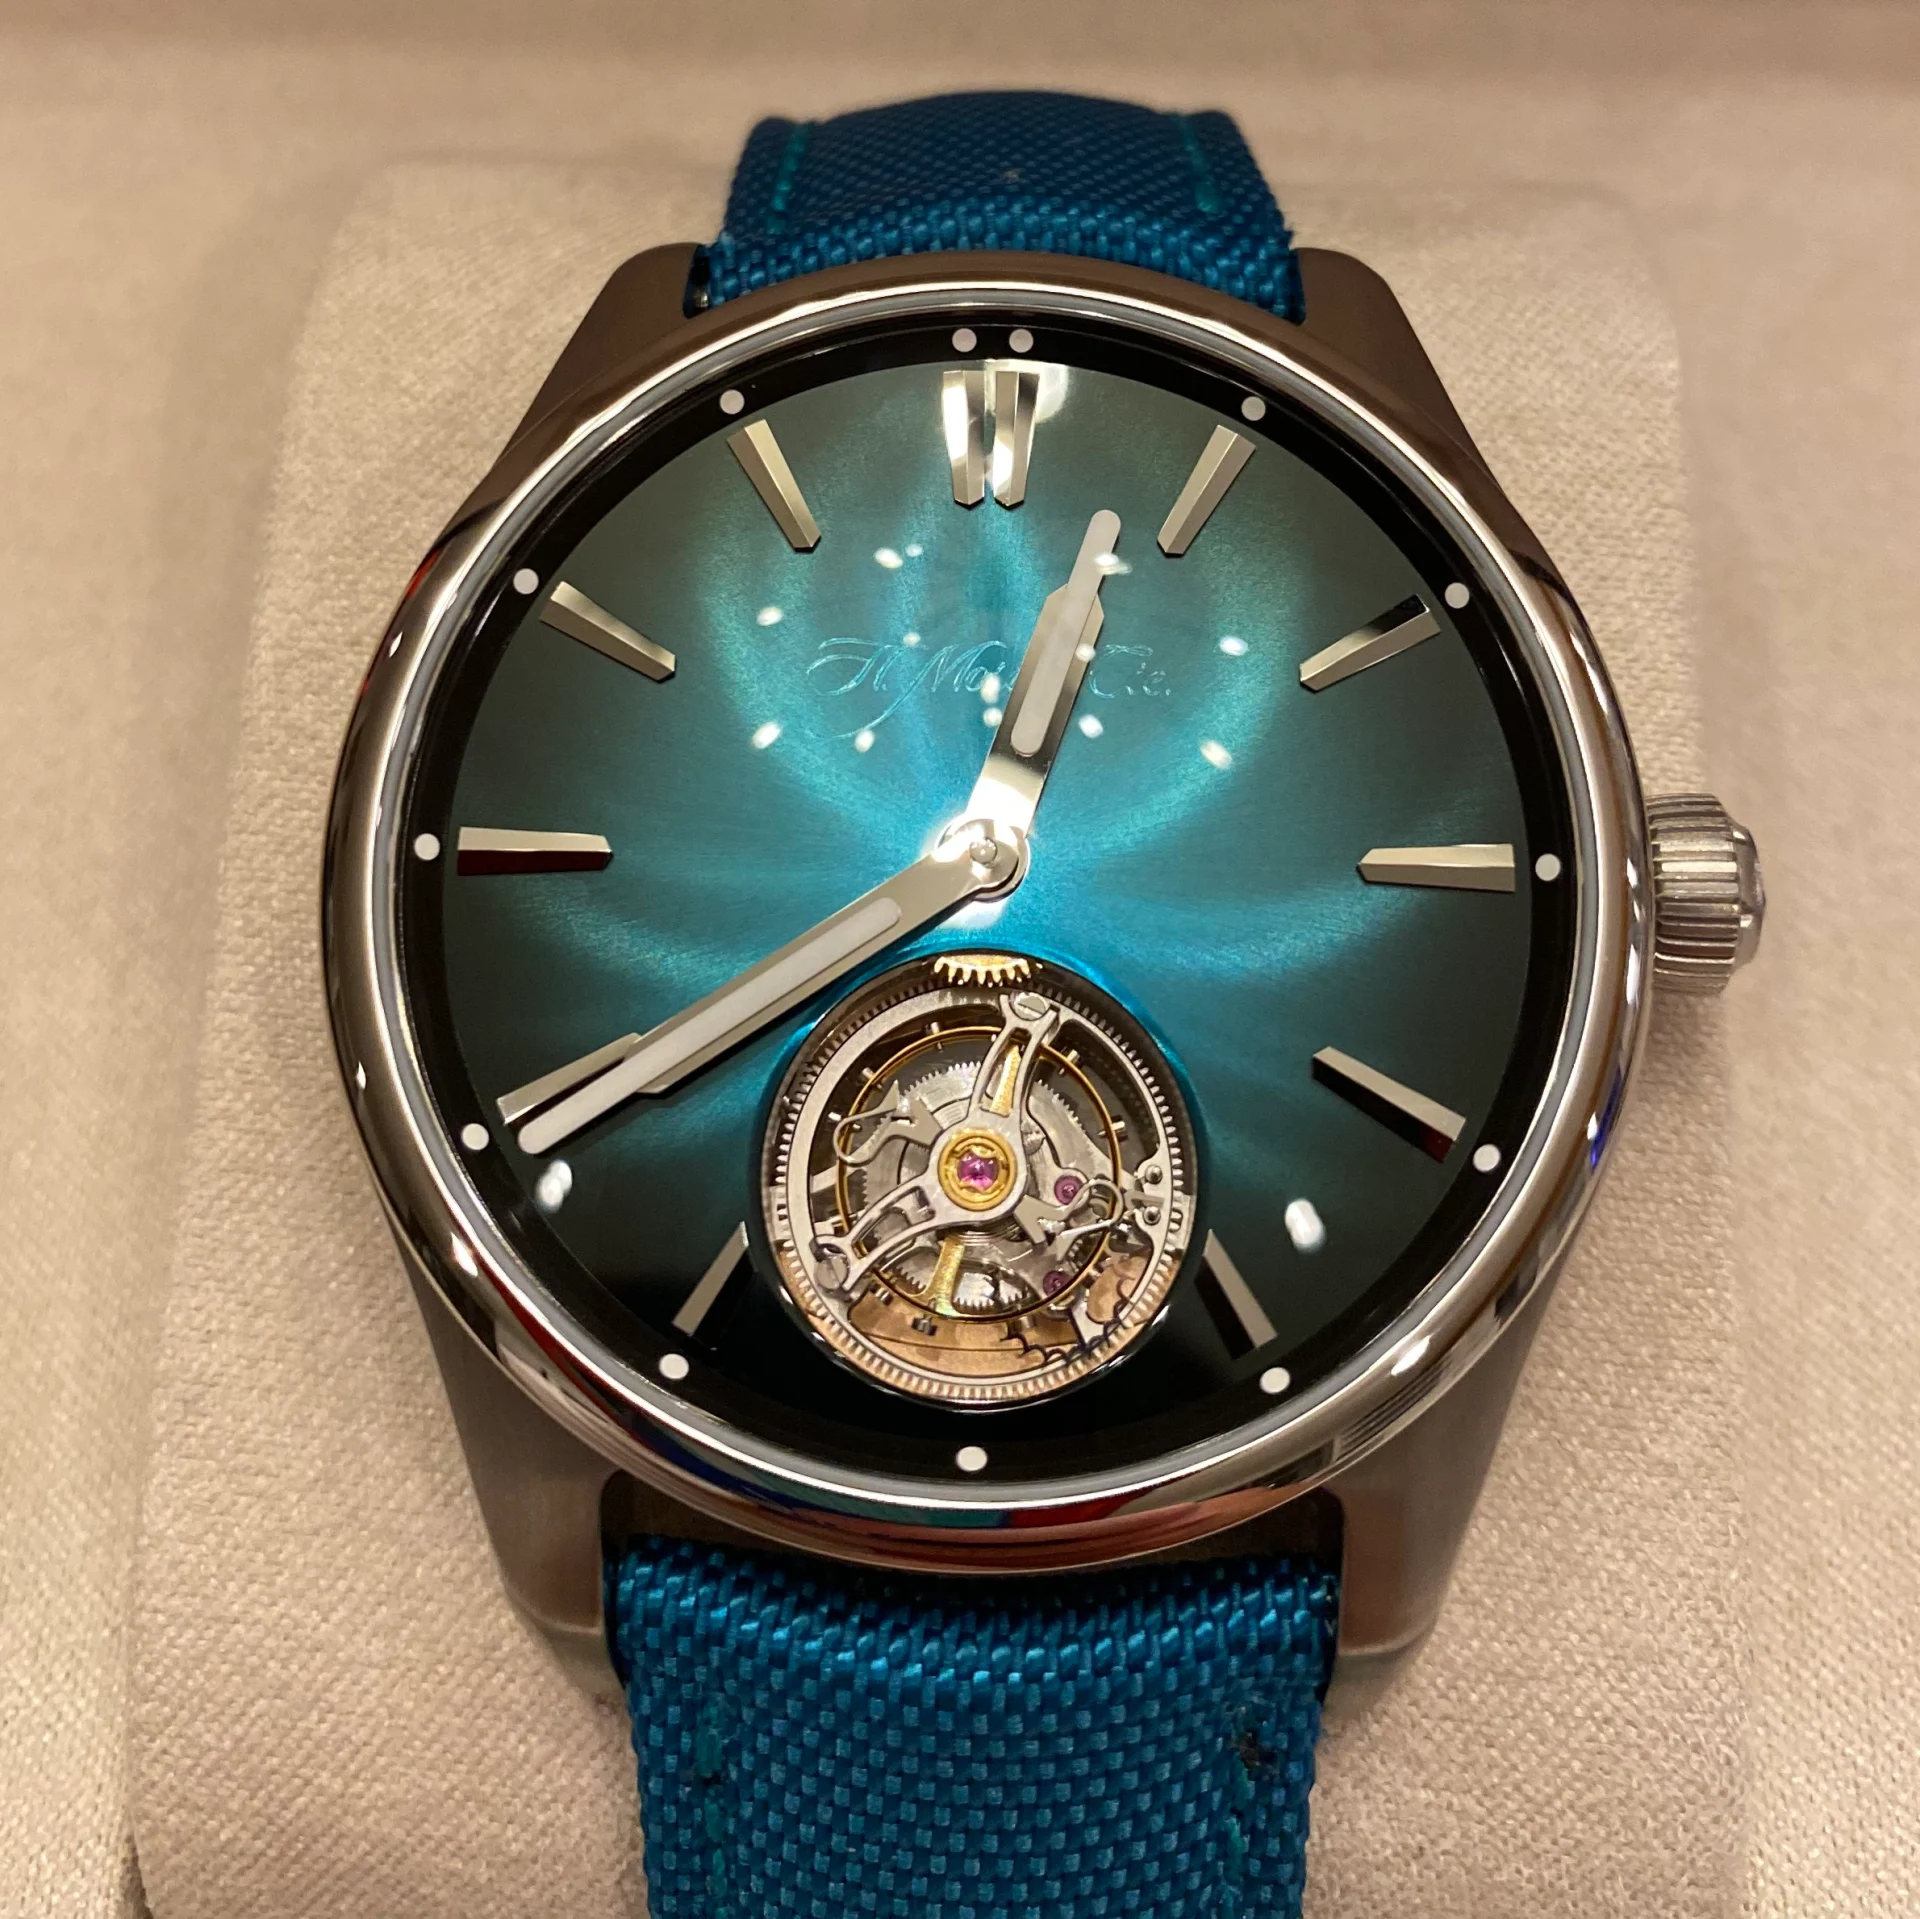 2022 H. Moser & Cie Pioneer Tourbillon Blue Lagoon Fumé - Limited to 50 Pieces 3804-1205 Listing Image 1